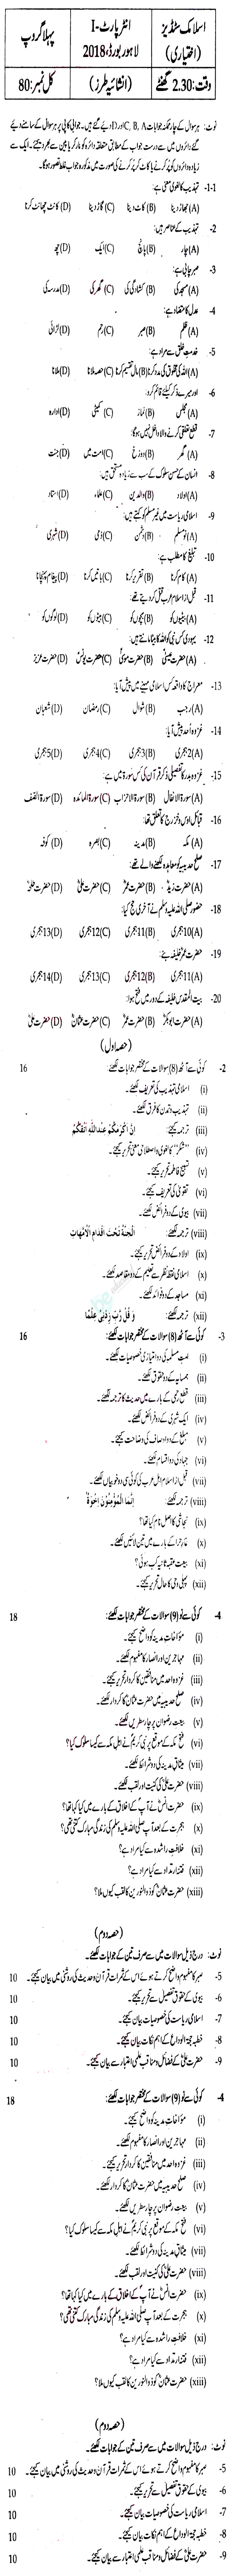 Islamic Studies 11th class Past Paper Group 1 BISE Lahore 2018